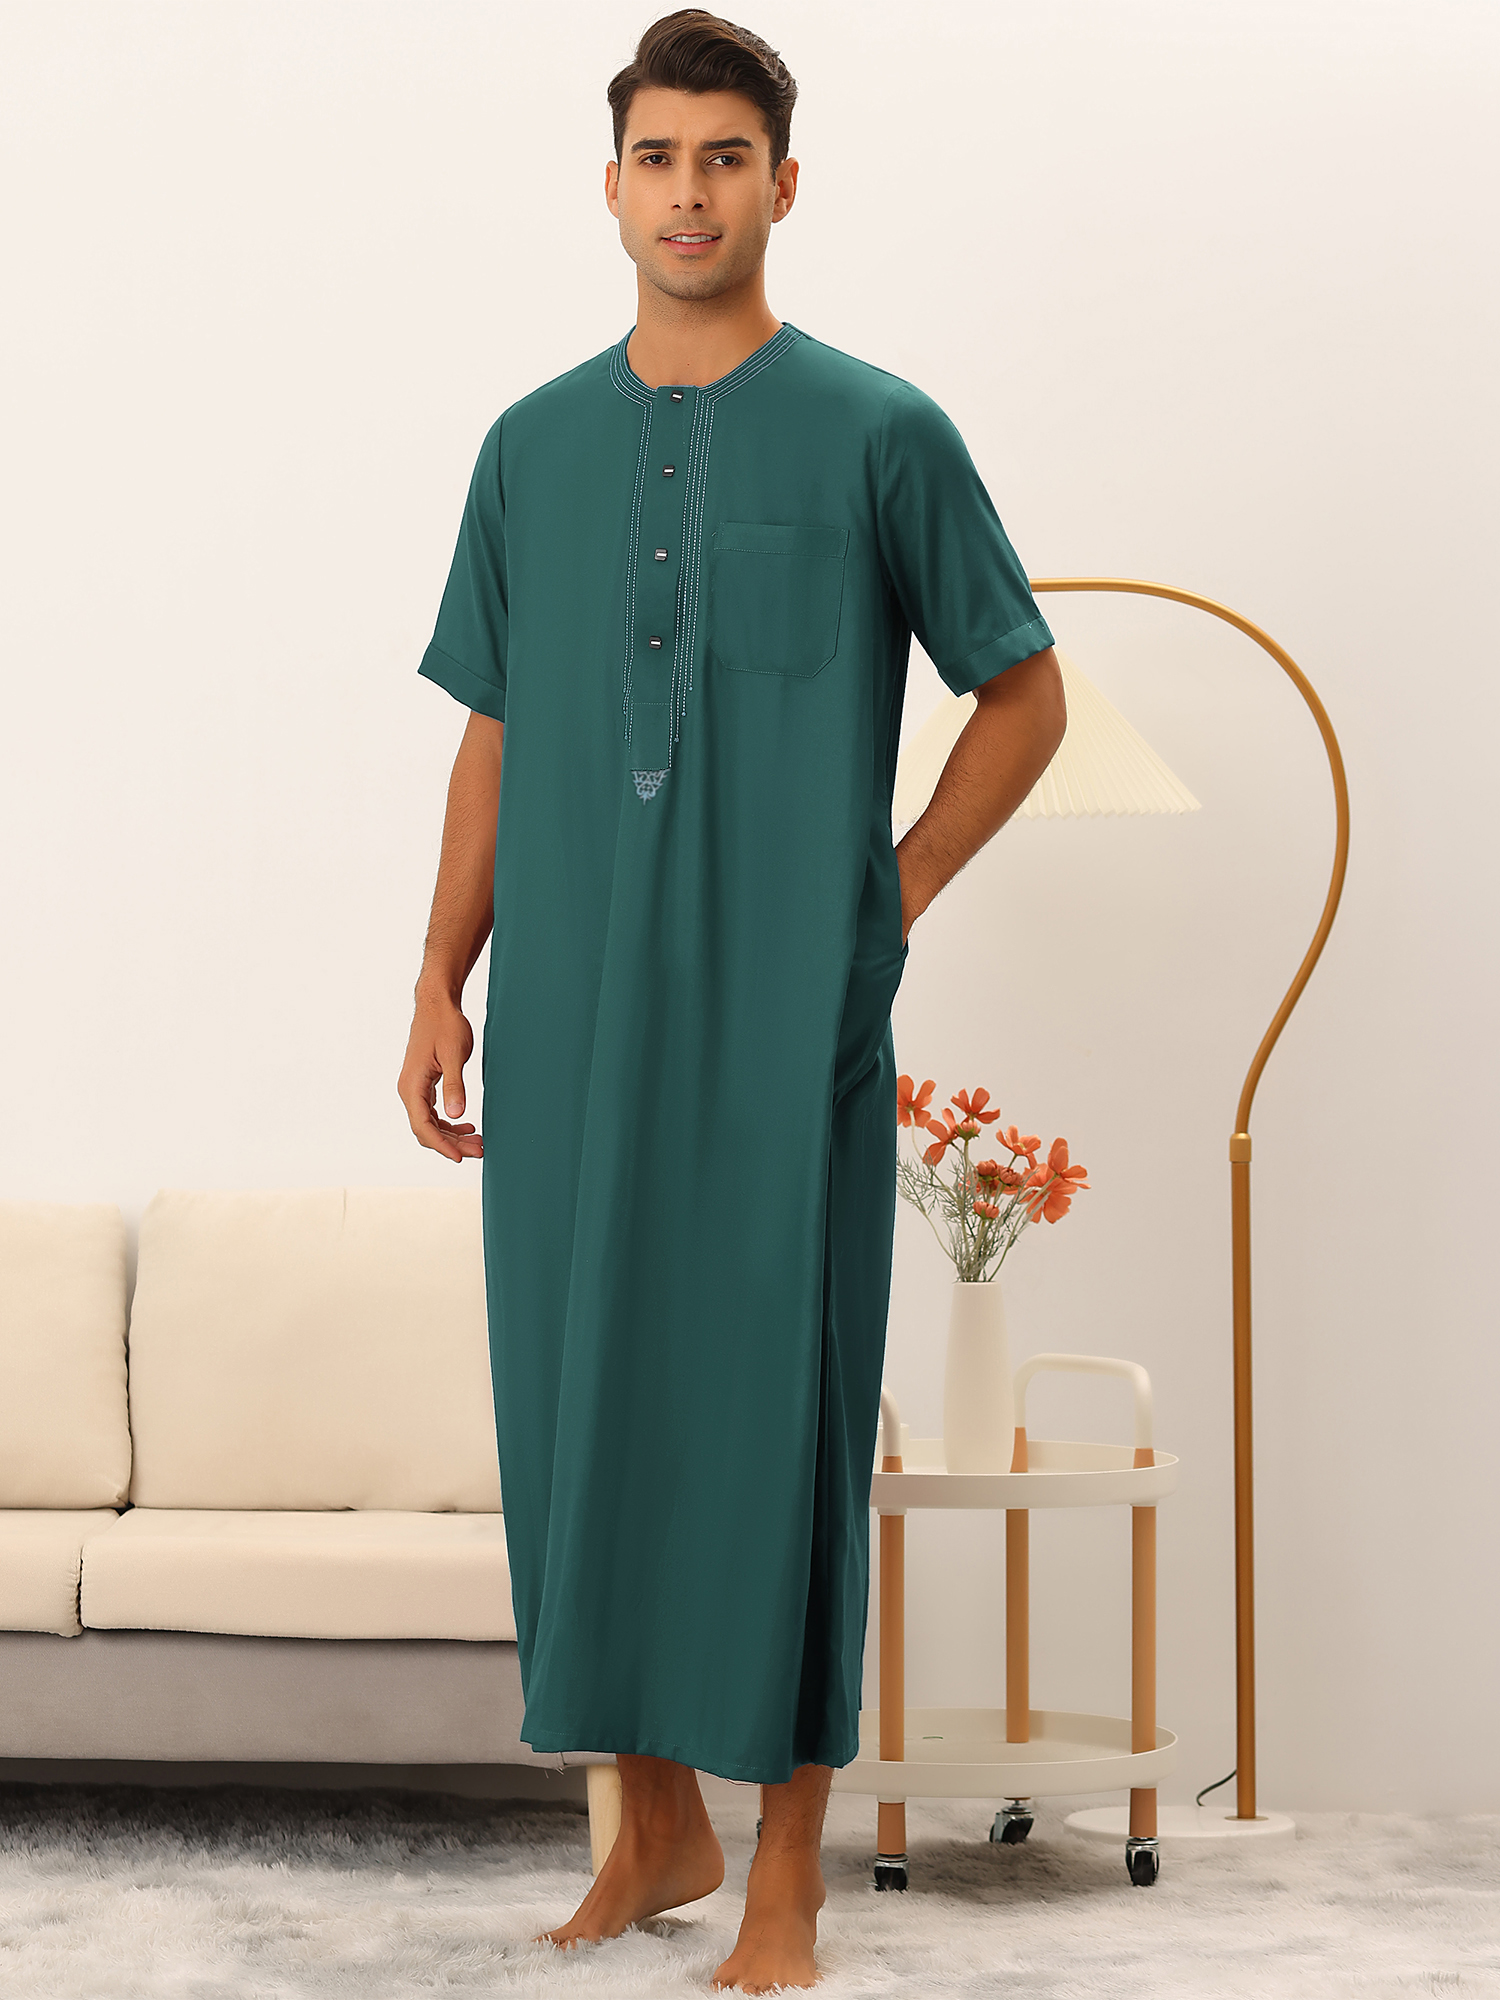 Unique Bargains Loose Fit Night Gown for Men's Solid Color Short Sleeves Button Pajamas Sleepshirt